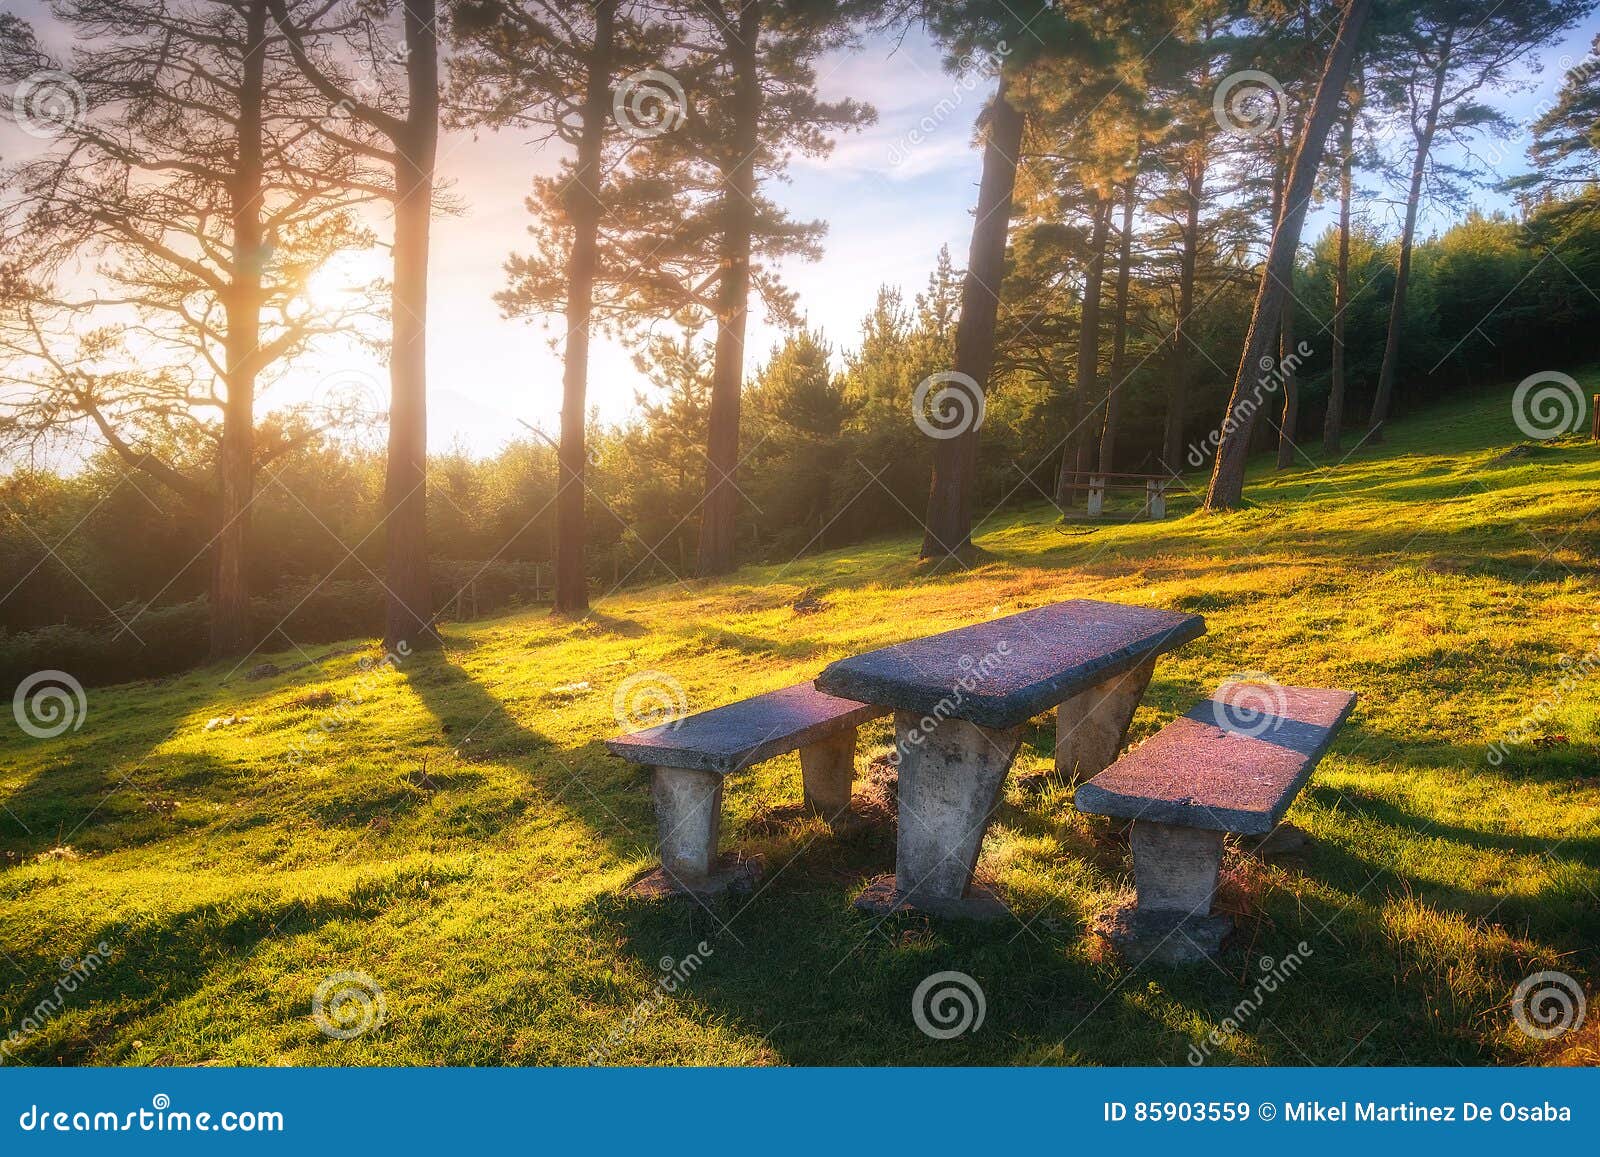 picnic table on moutain